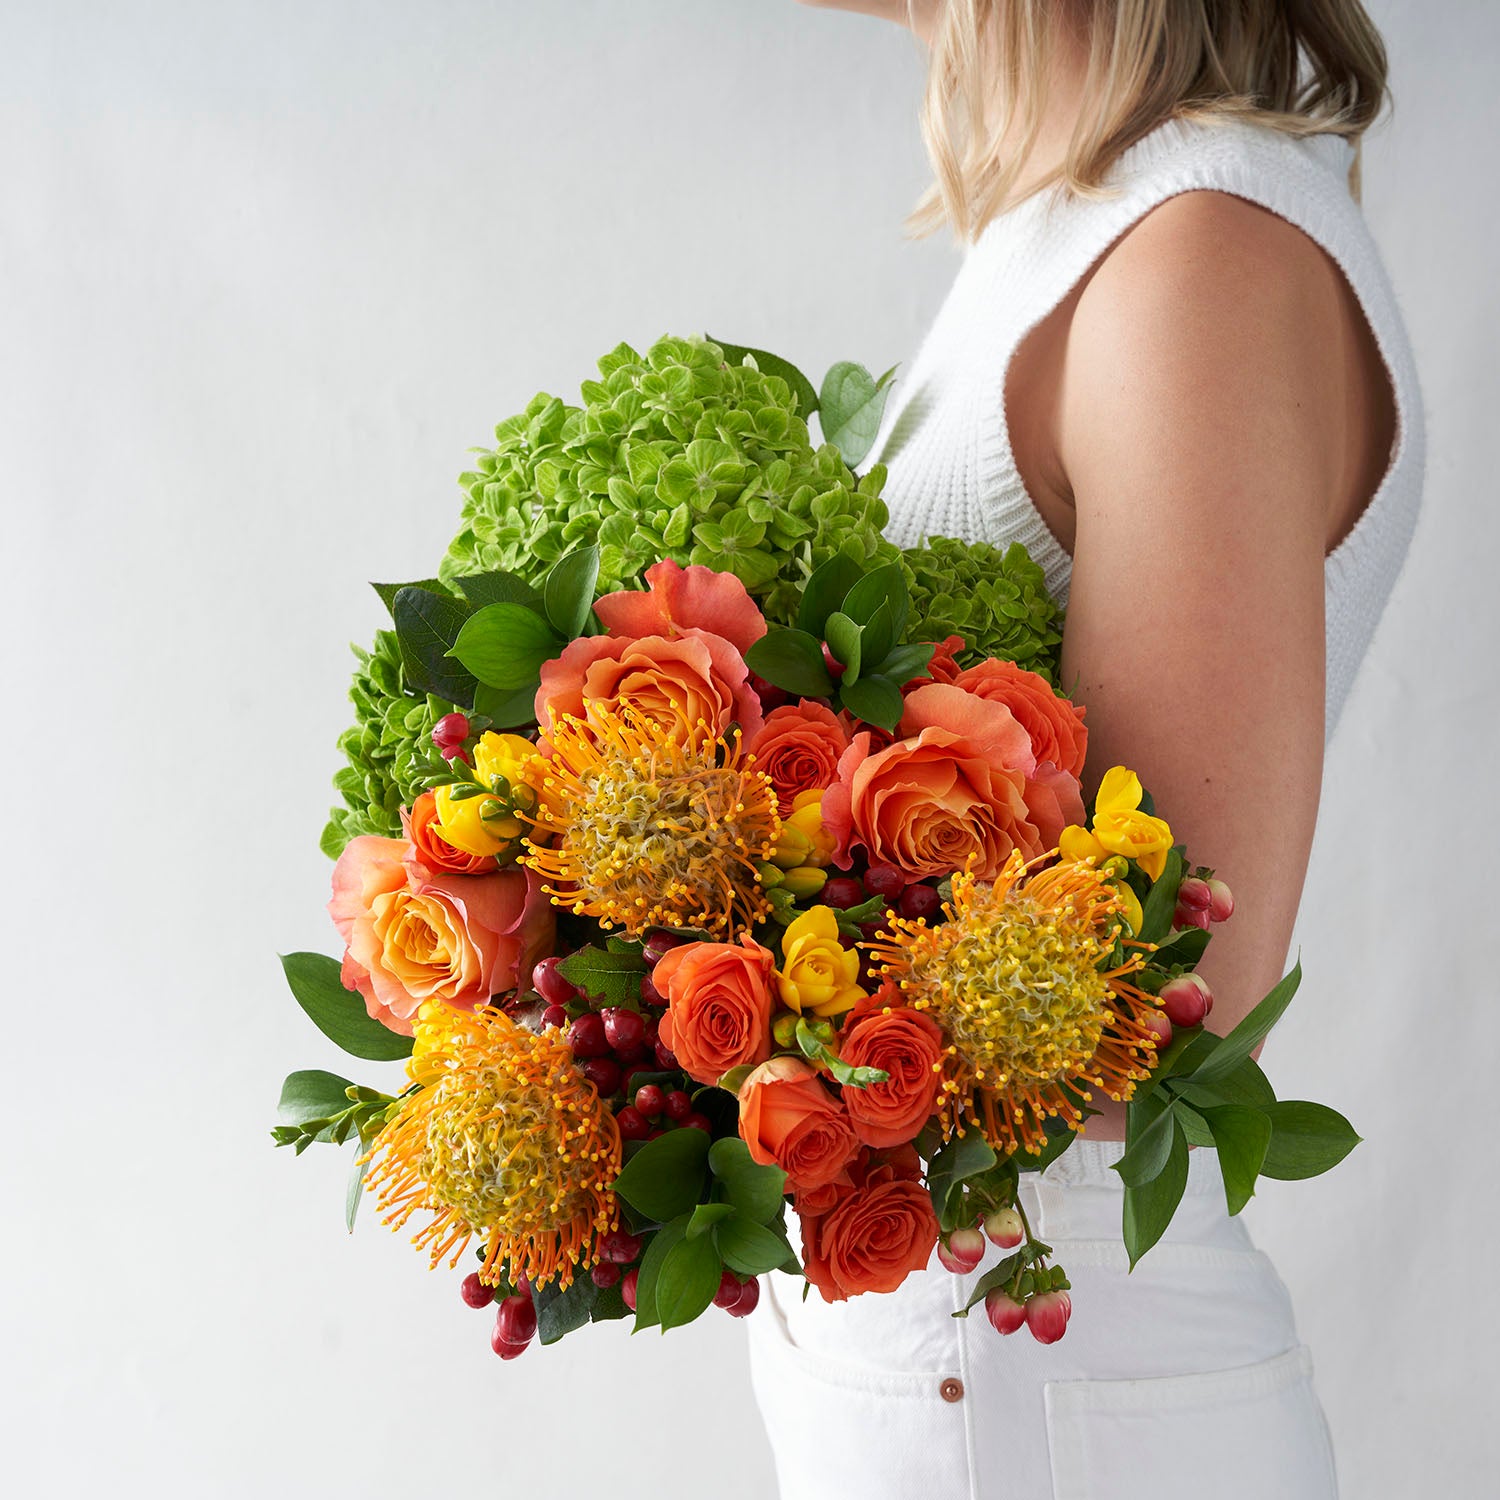 Woman in white holding bouquet of orange roses, yellow freesia, green hydrangea, gold protea, and red hypericum.